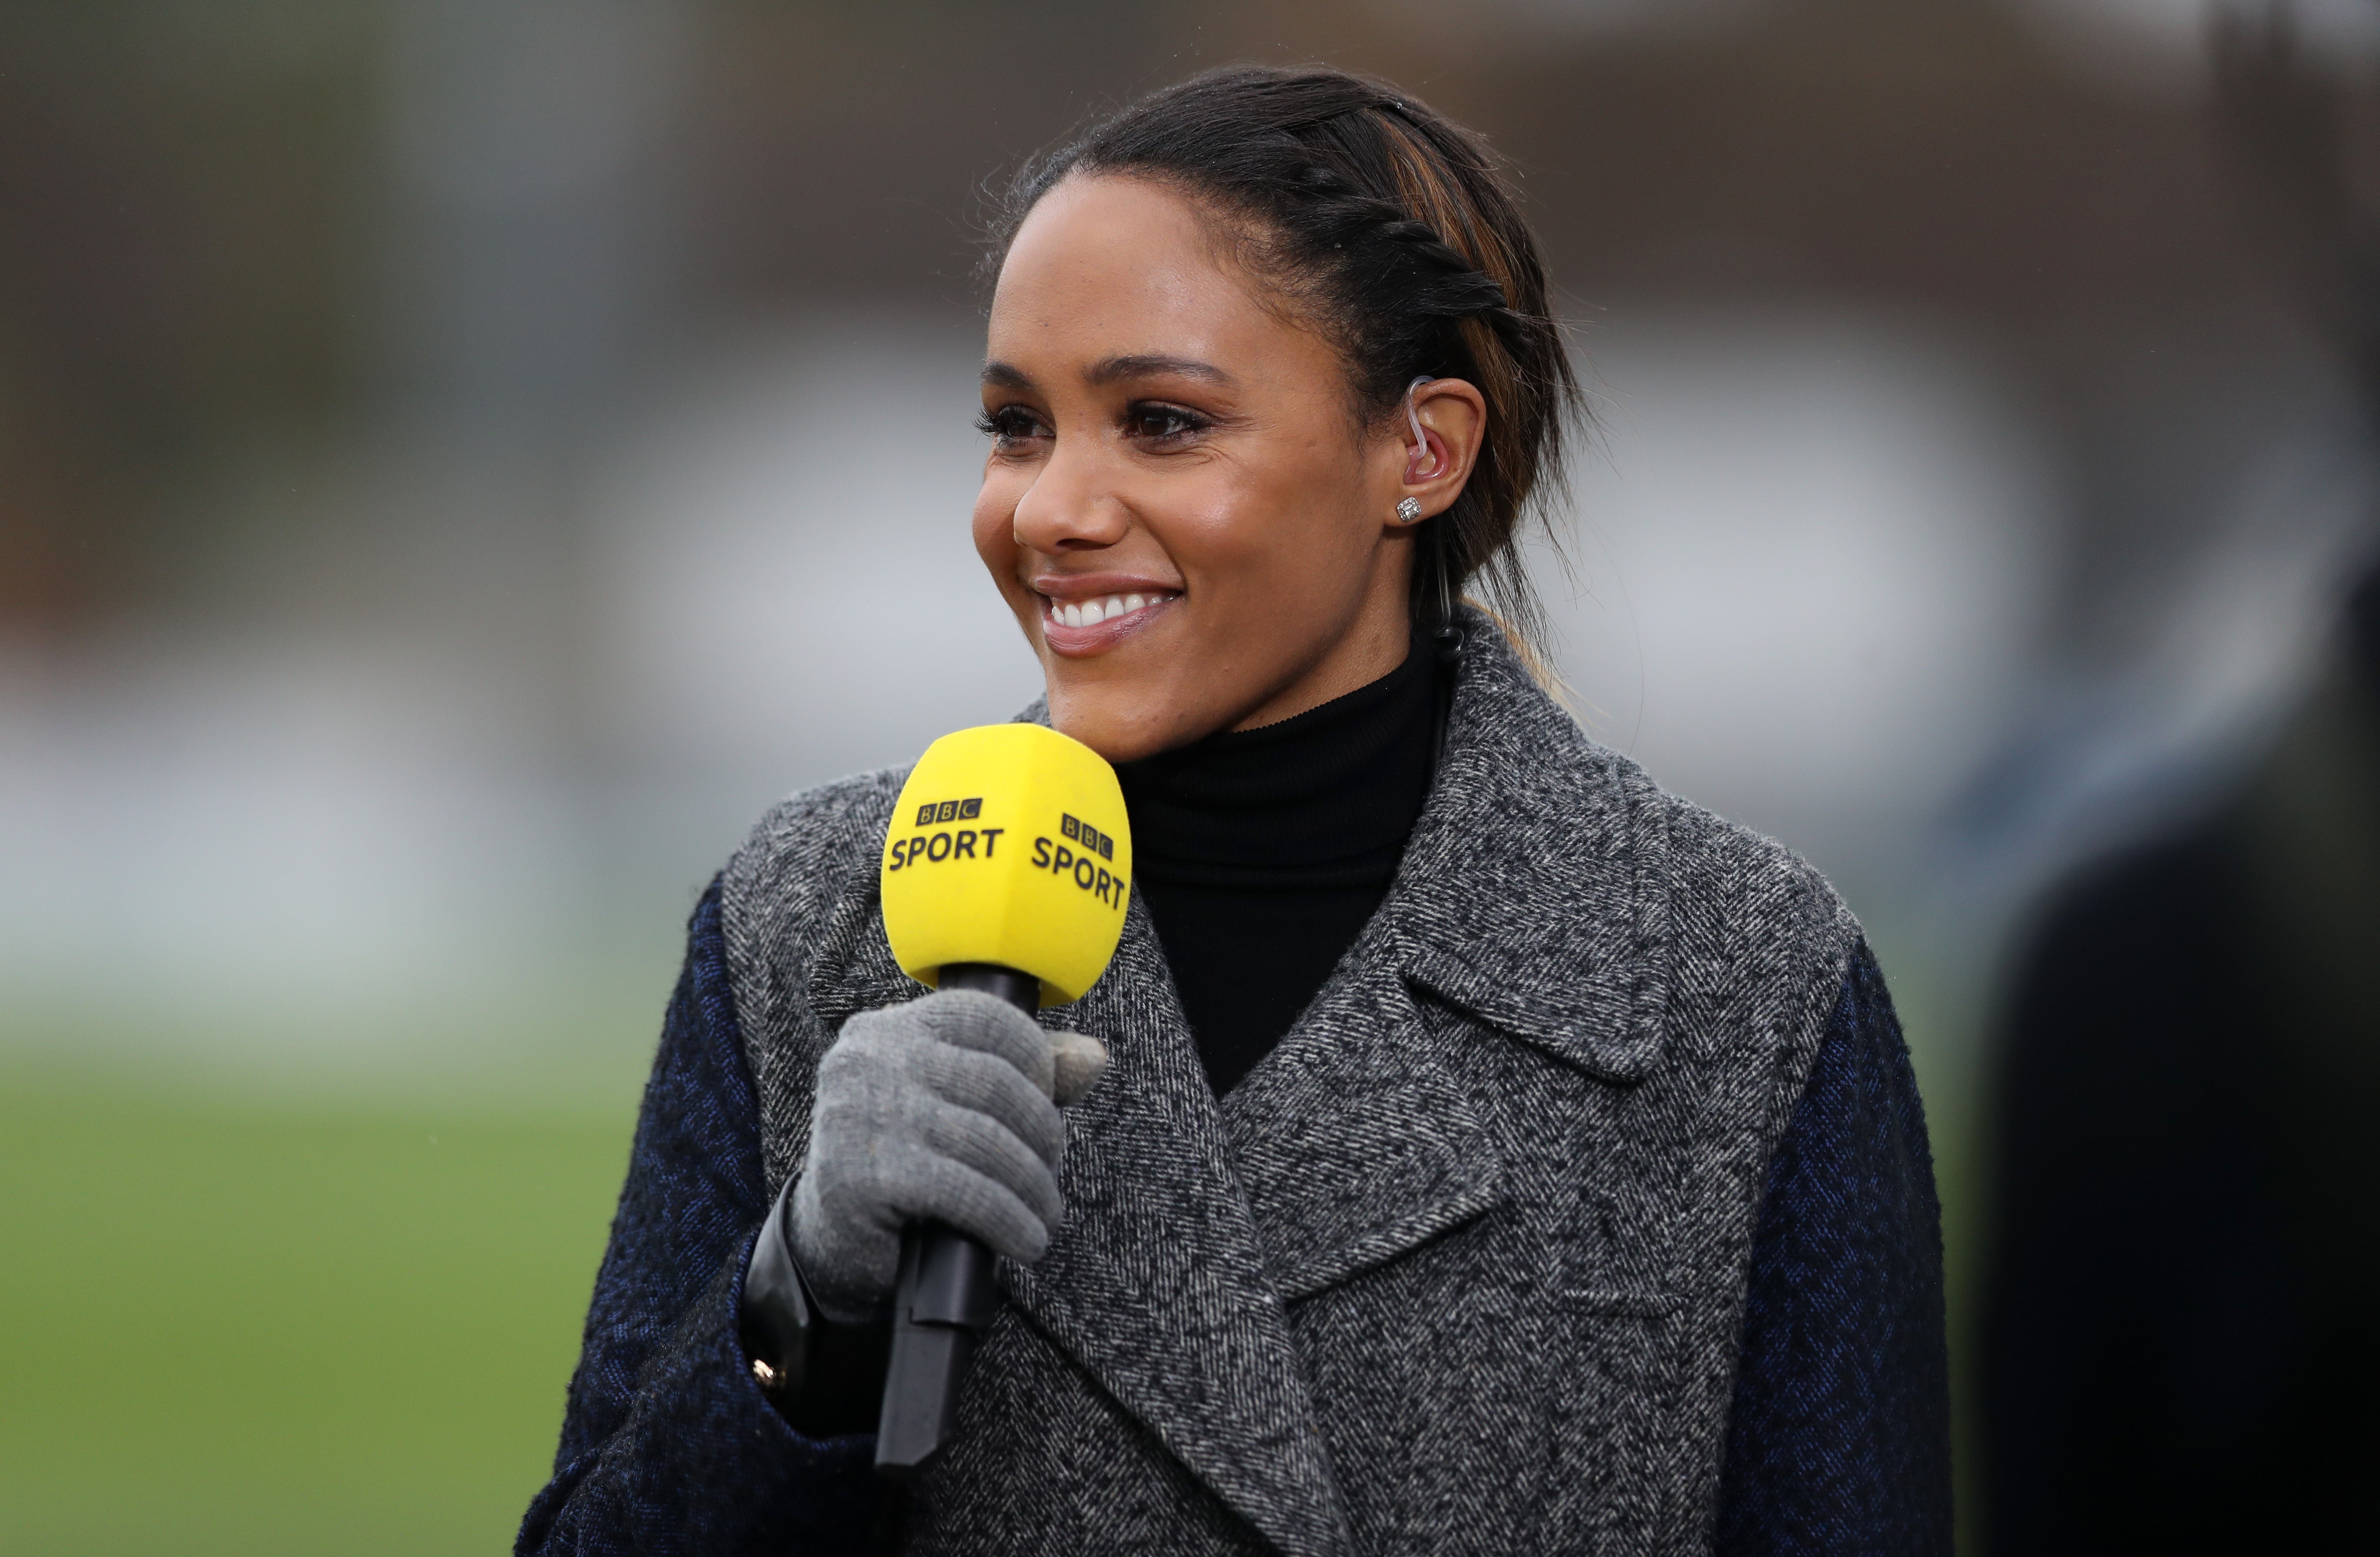 Former Arsenal and England player Alex Scott will present the BBC’s coverage of the Women’s Super League